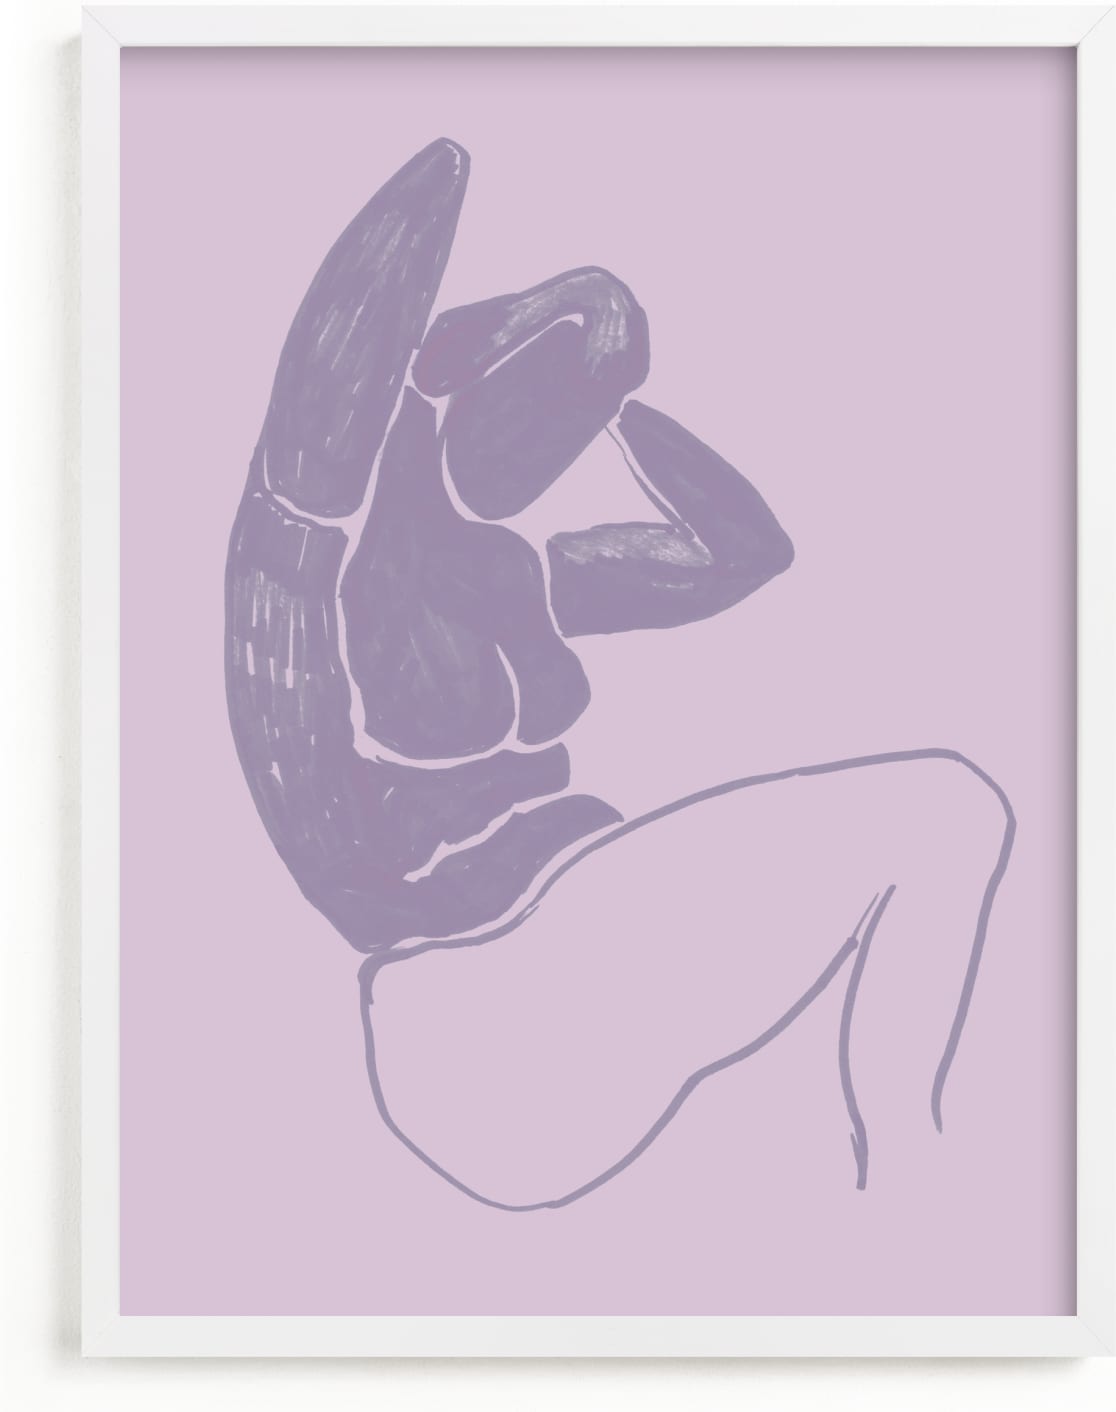 This is a purple art by Oana Prints called Sitting nude.